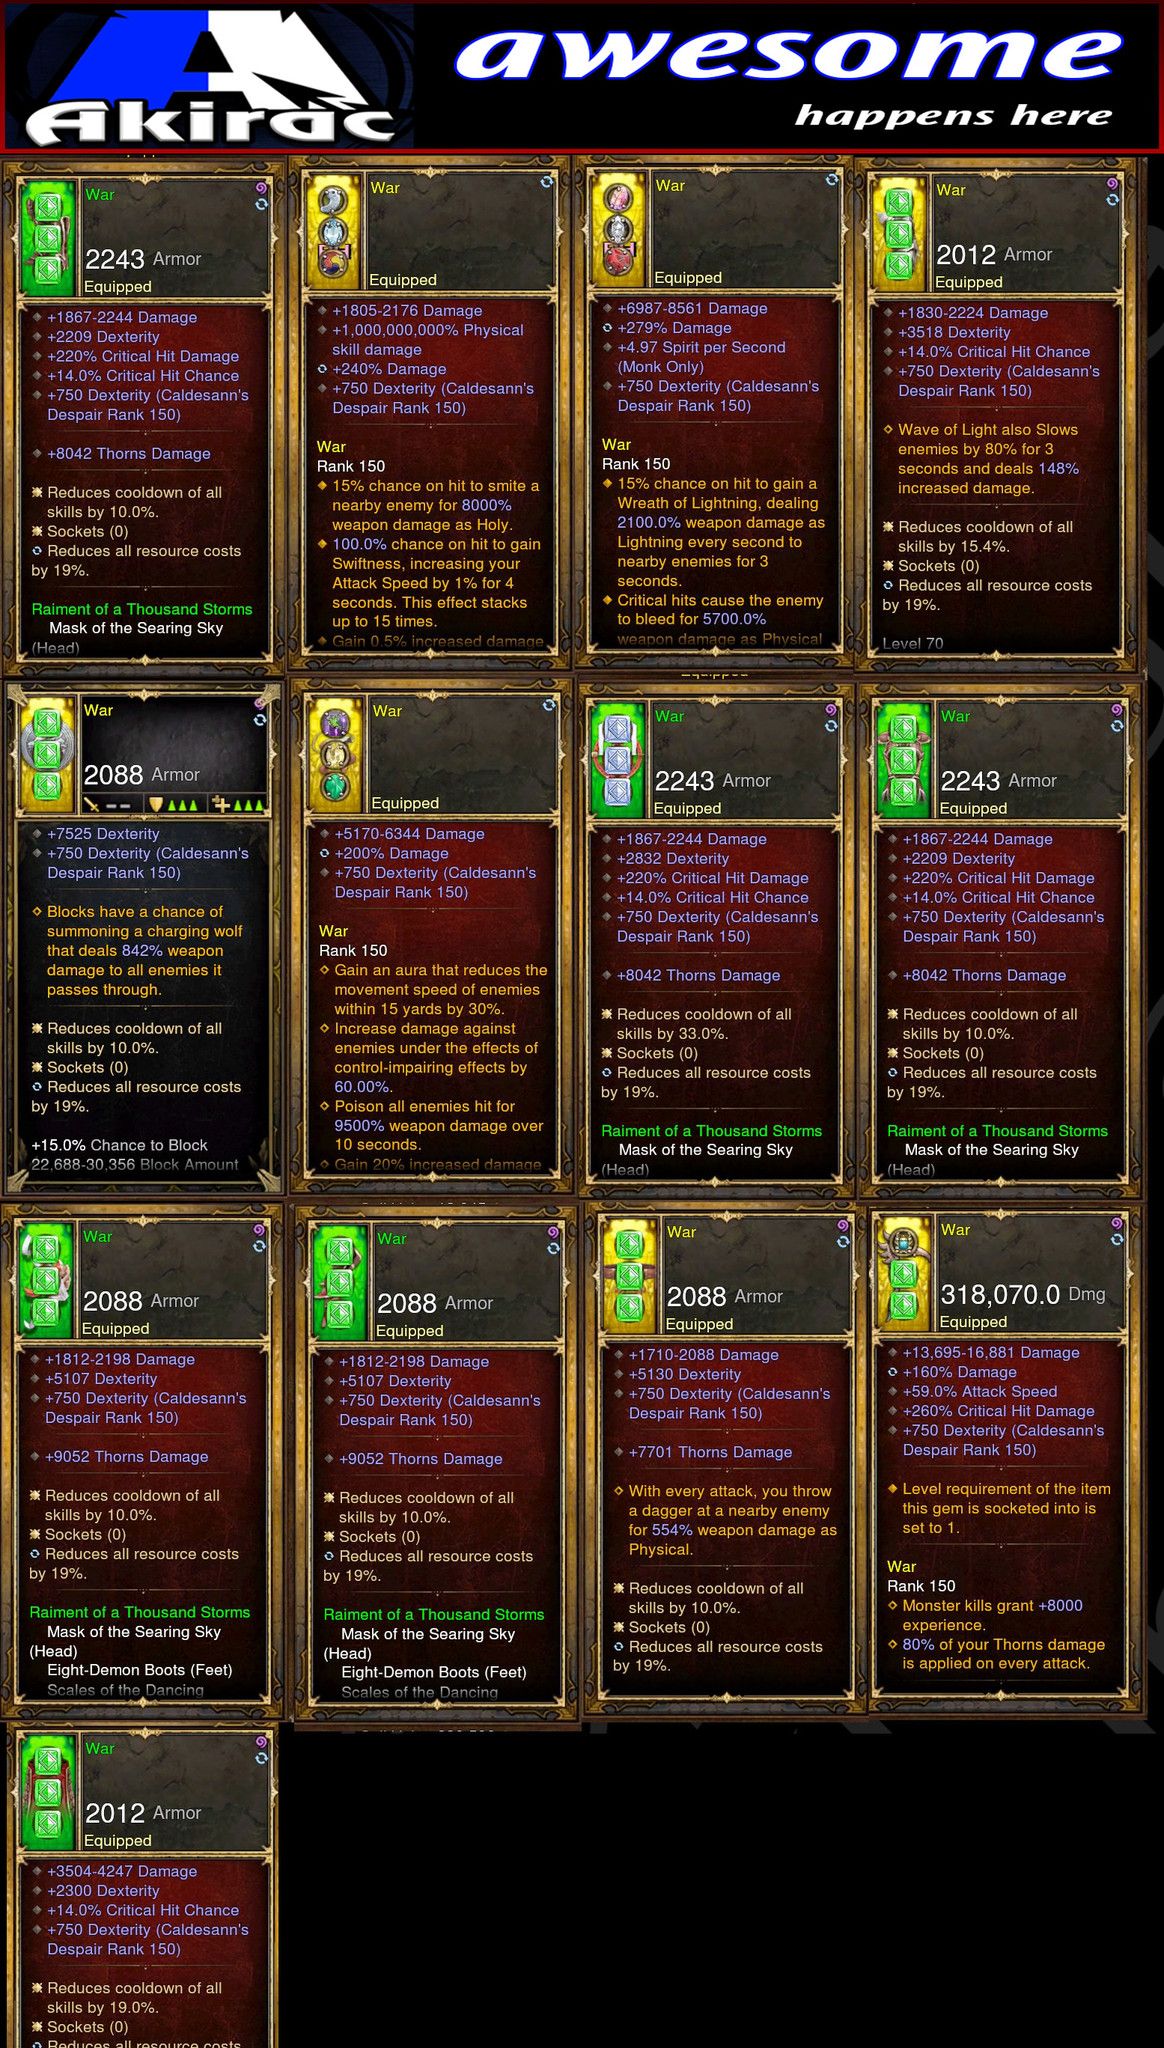 Diablo 3 Immortal v3 FASTEST TStorms Monk Modded Set for Rift 150 WAR Diablo 3 Mods ROS Seasonal and Non Seasonal Save Mod - Modded Items and Gear - Hacks - Cheats - Trainers for Playstation 4 - Playstation 5 - Nintendo Switch - Xbox One